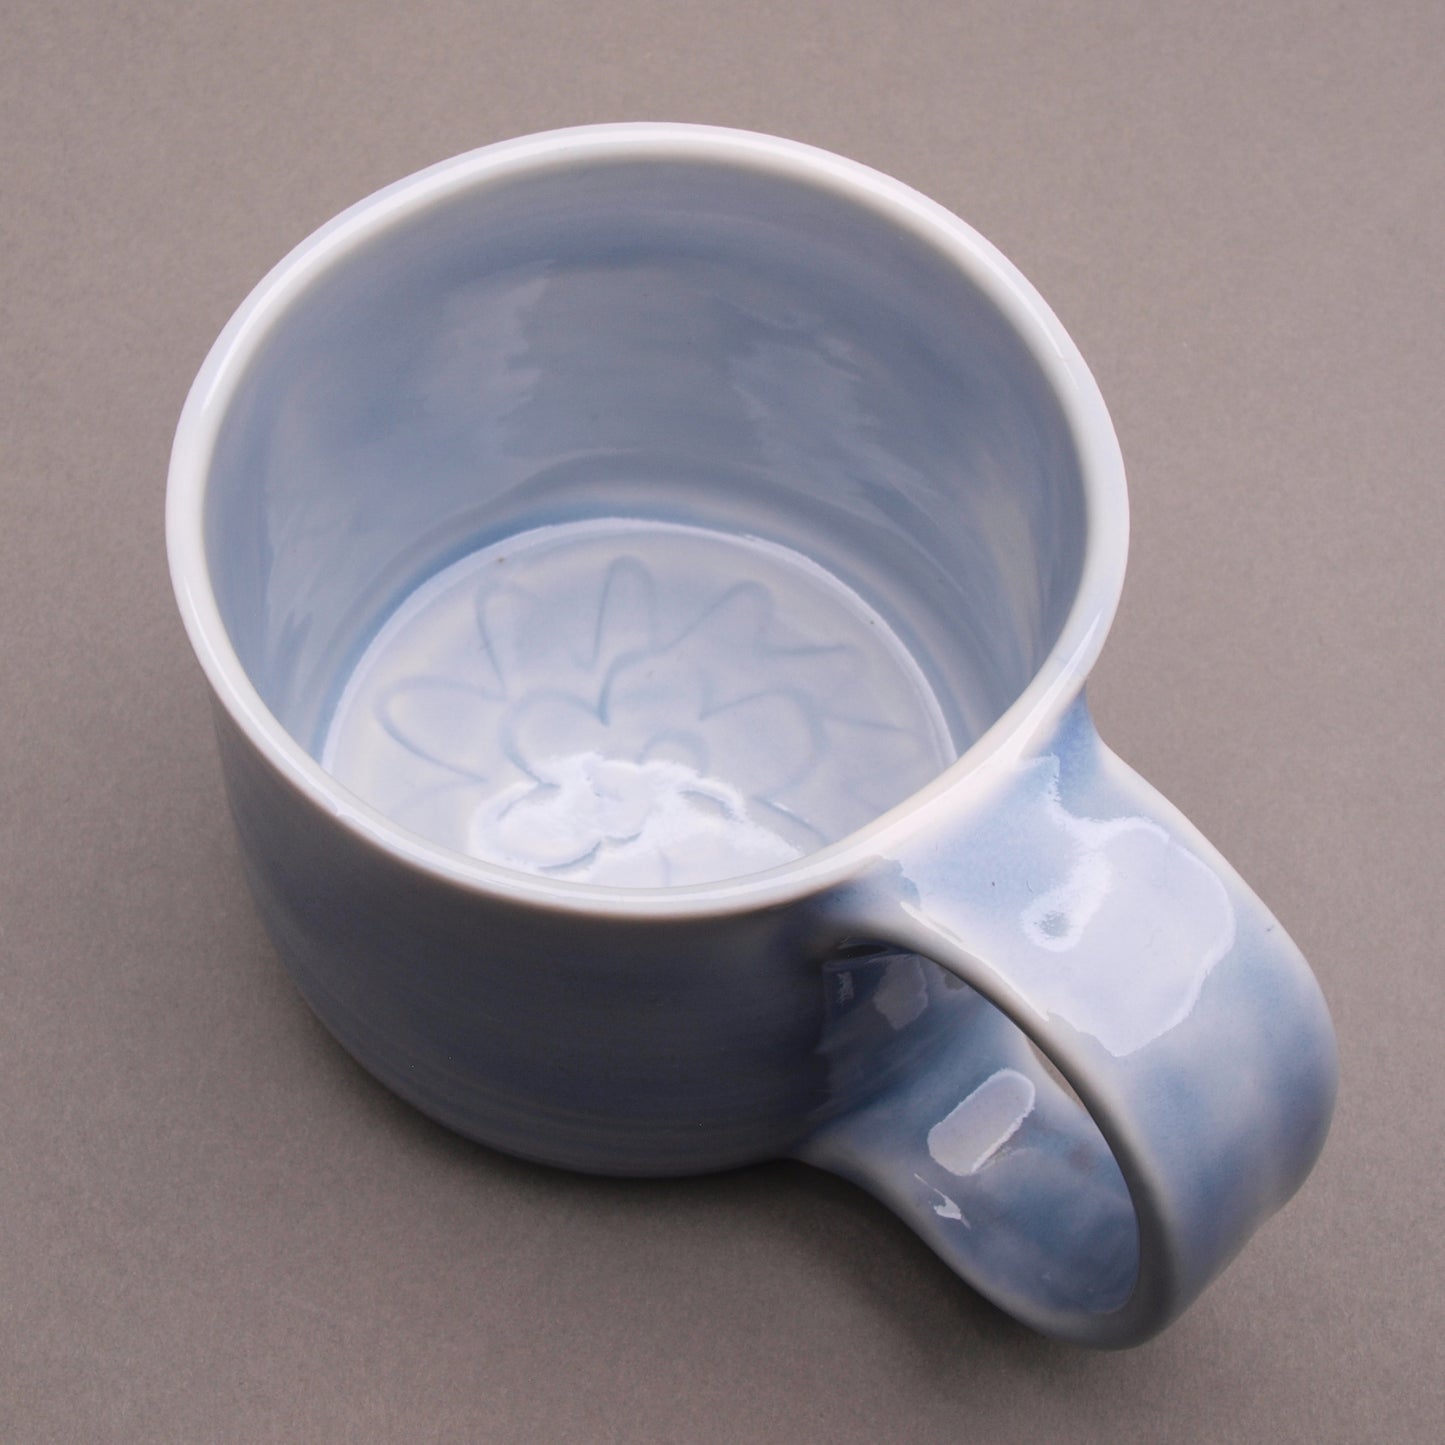 Handcrafted 'PARK CITY' Souvenir Mug by Mike Hays: Artistry, Comfort, and Durability MUG #5